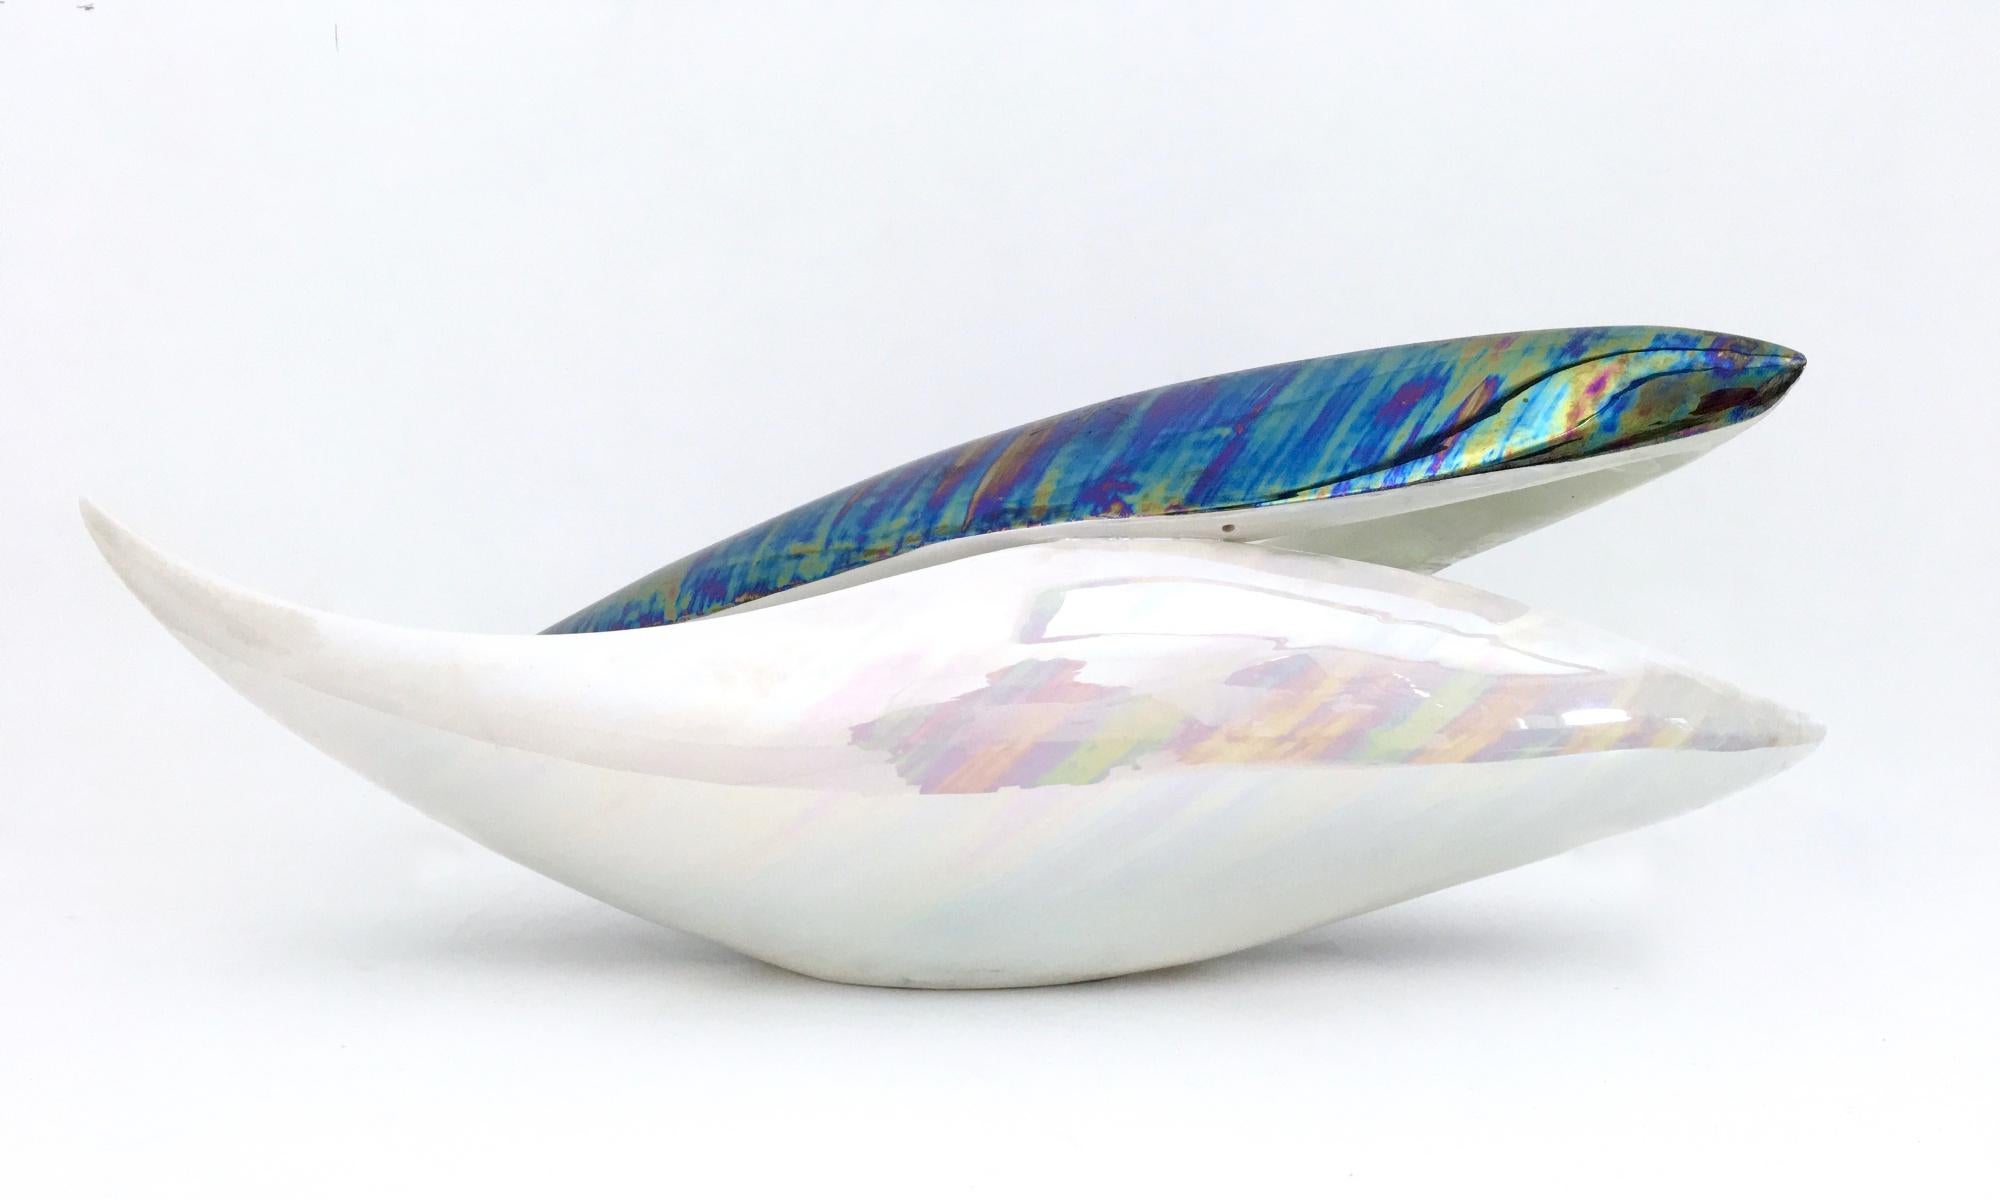 Italian Vintage White and Iridescent Ceramic Bowl or Centerpiece N 6768 by Lusso, Italy For Sale